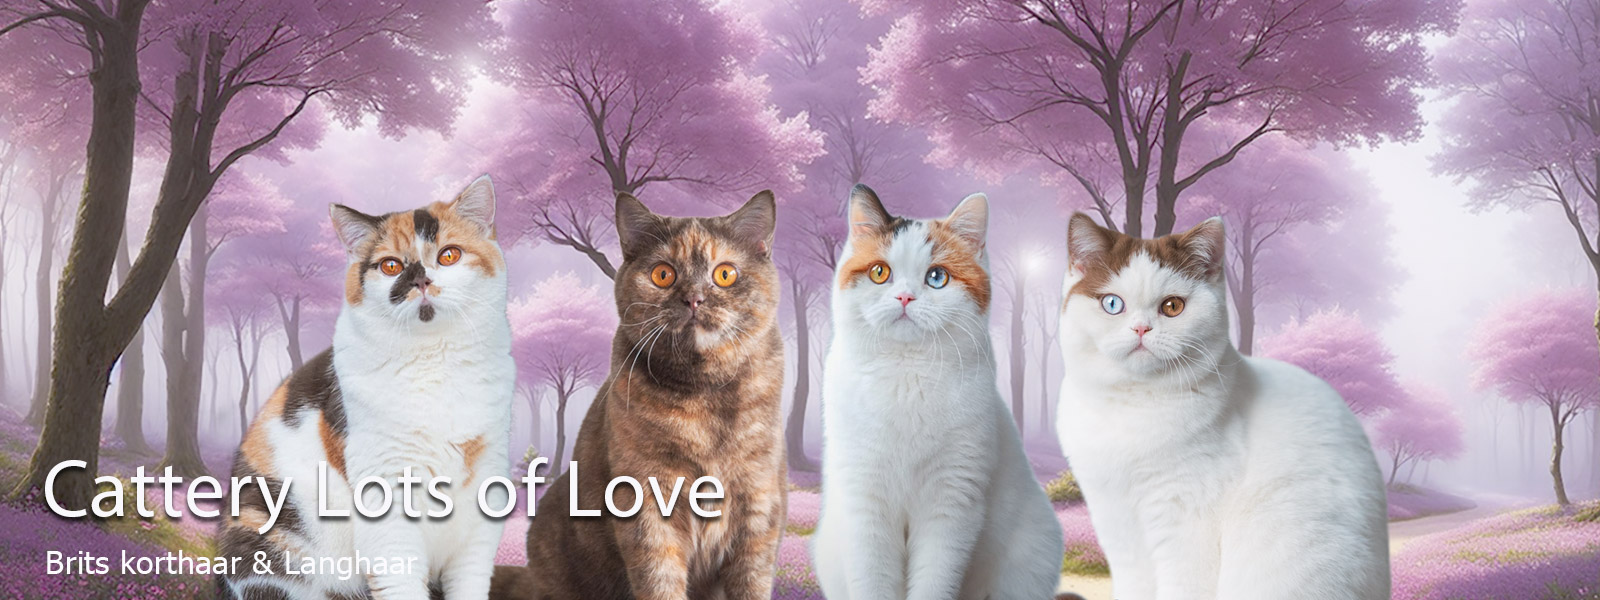 Cattery Lots of Love